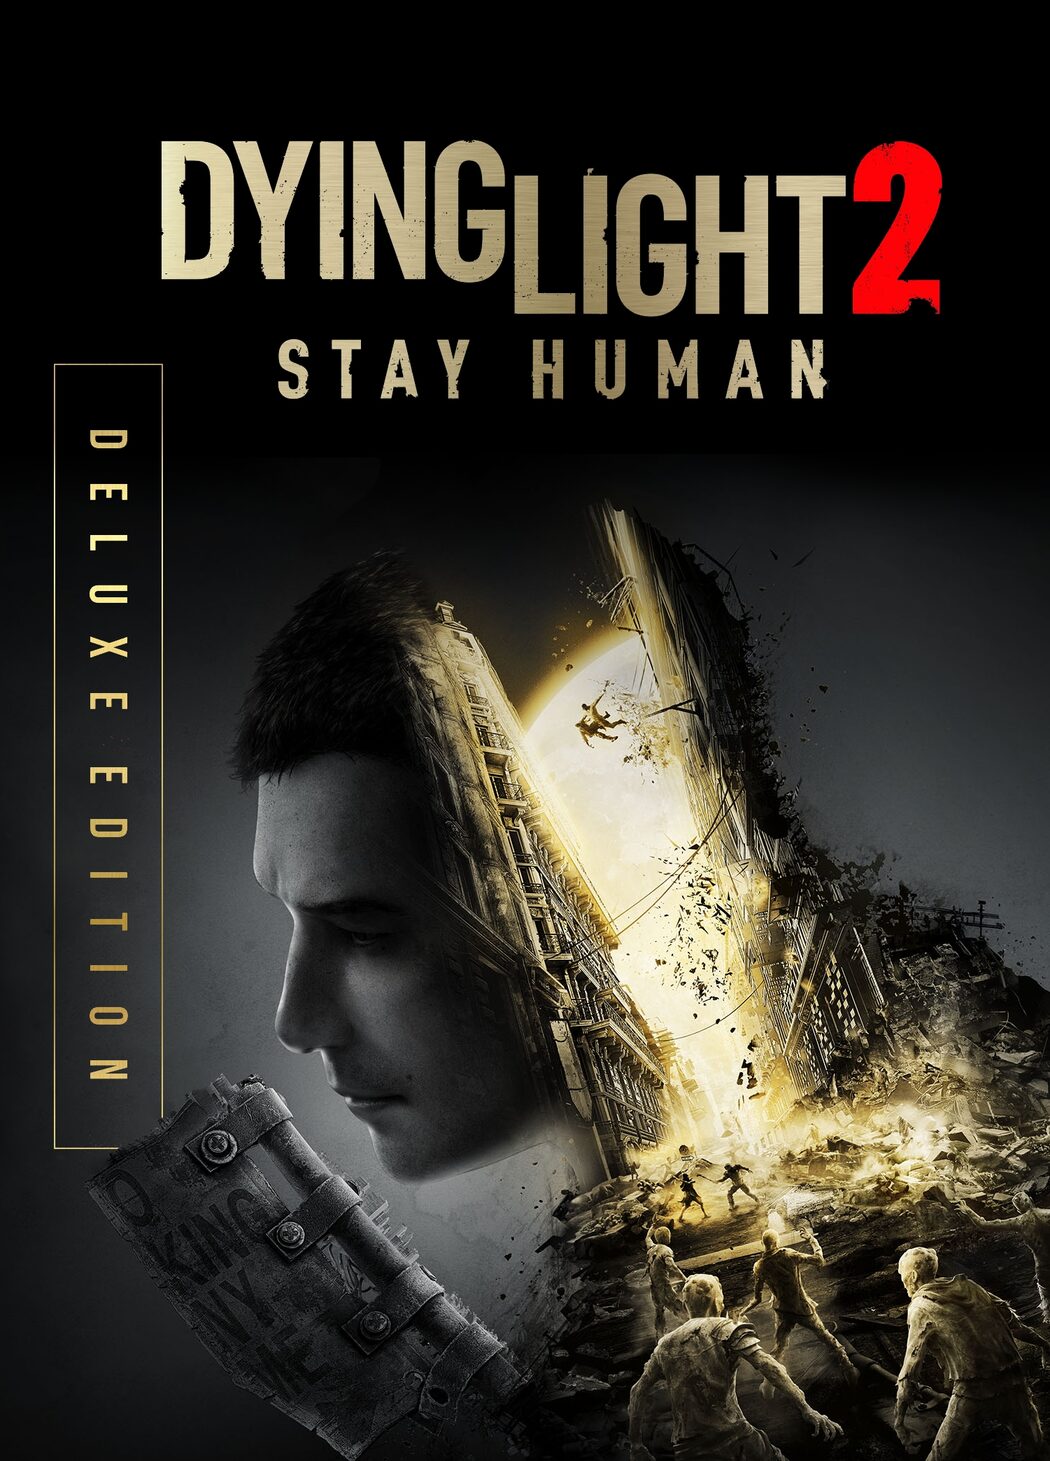 Dying Light 2 Stay Human - Black Friday Edition